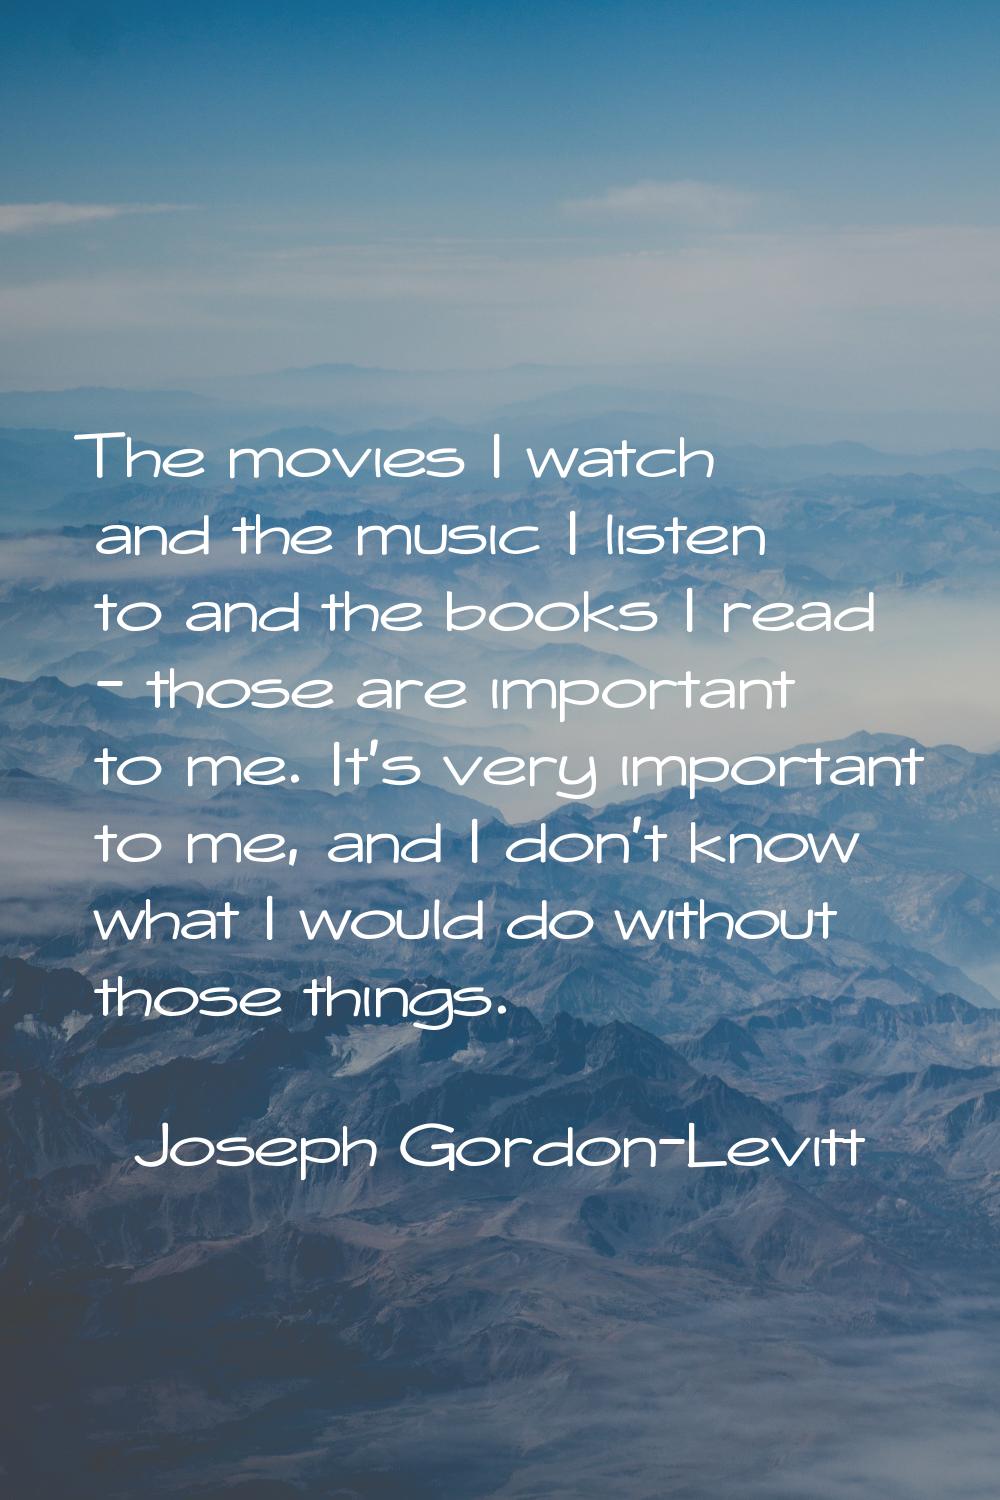 The movies I watch and the music I listen to and the books I read - those are important to me. It's